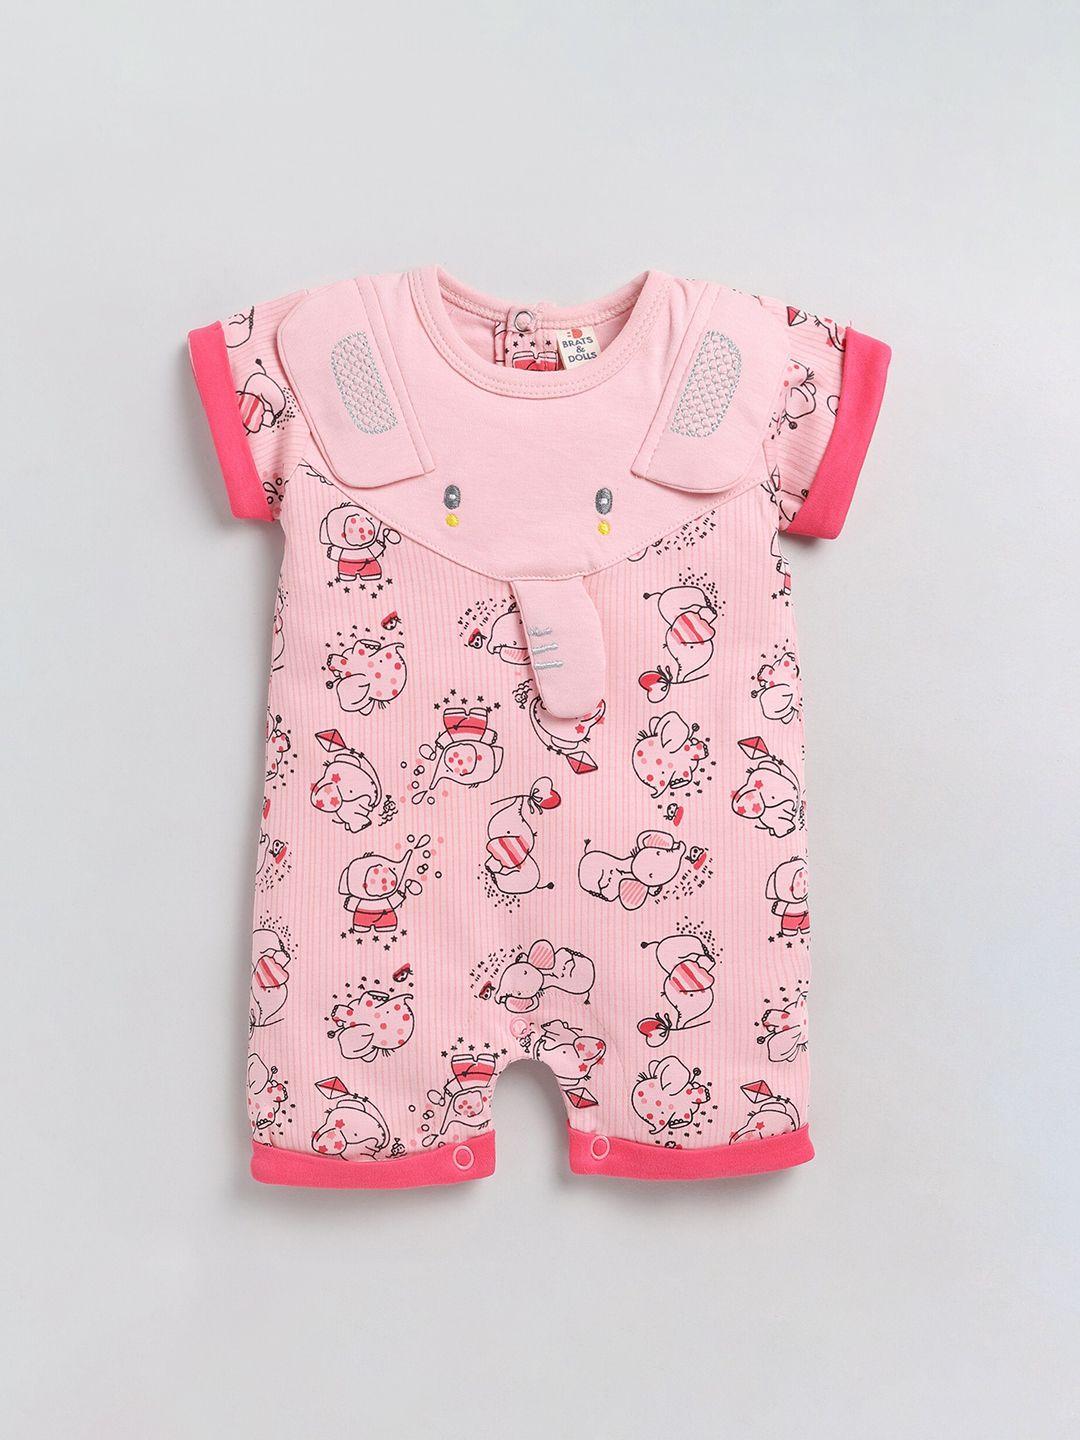 brats-and-dolls-infant-girls-printed-pure-cotton-rompers